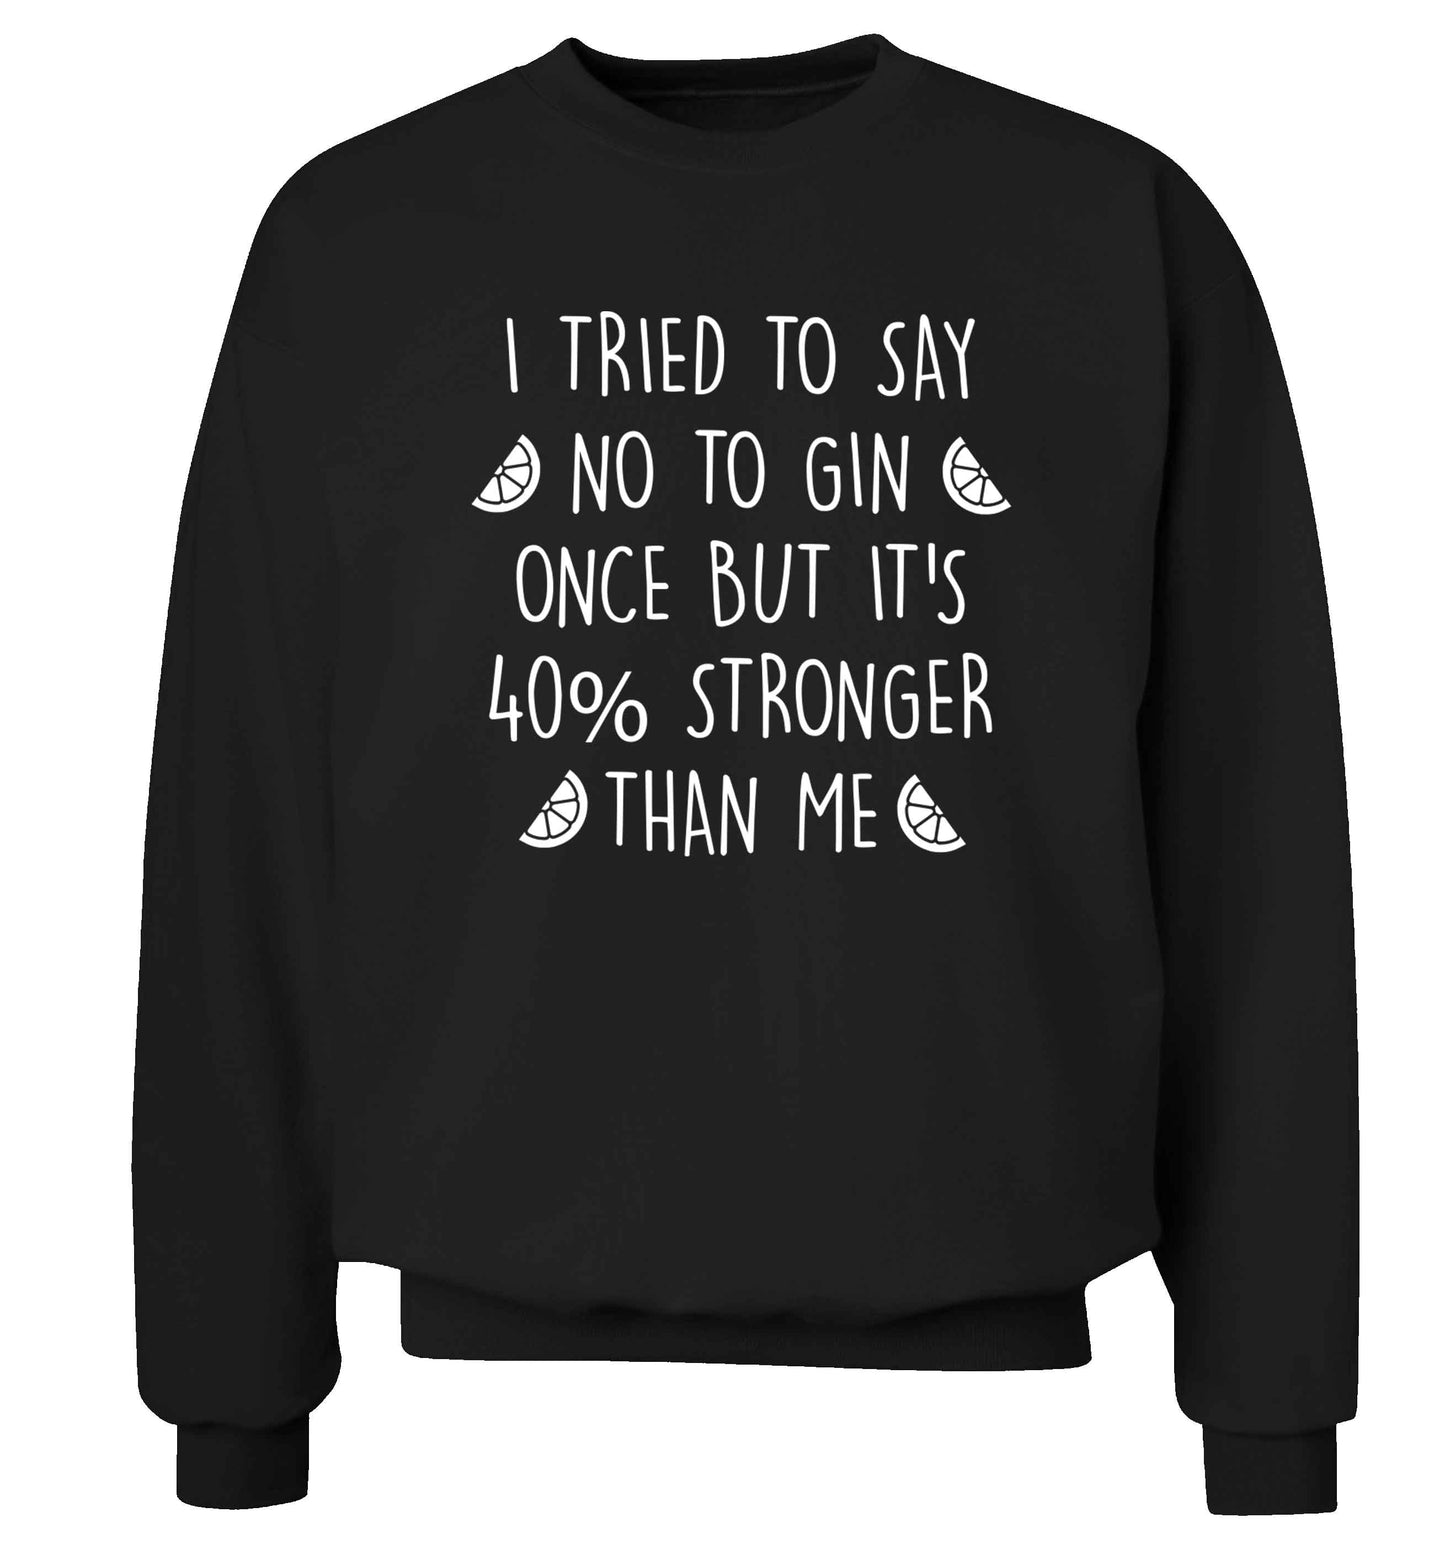 I tried to say no to gin once but it's 40% stronger than me Adult's unisex black Sweater 2XL